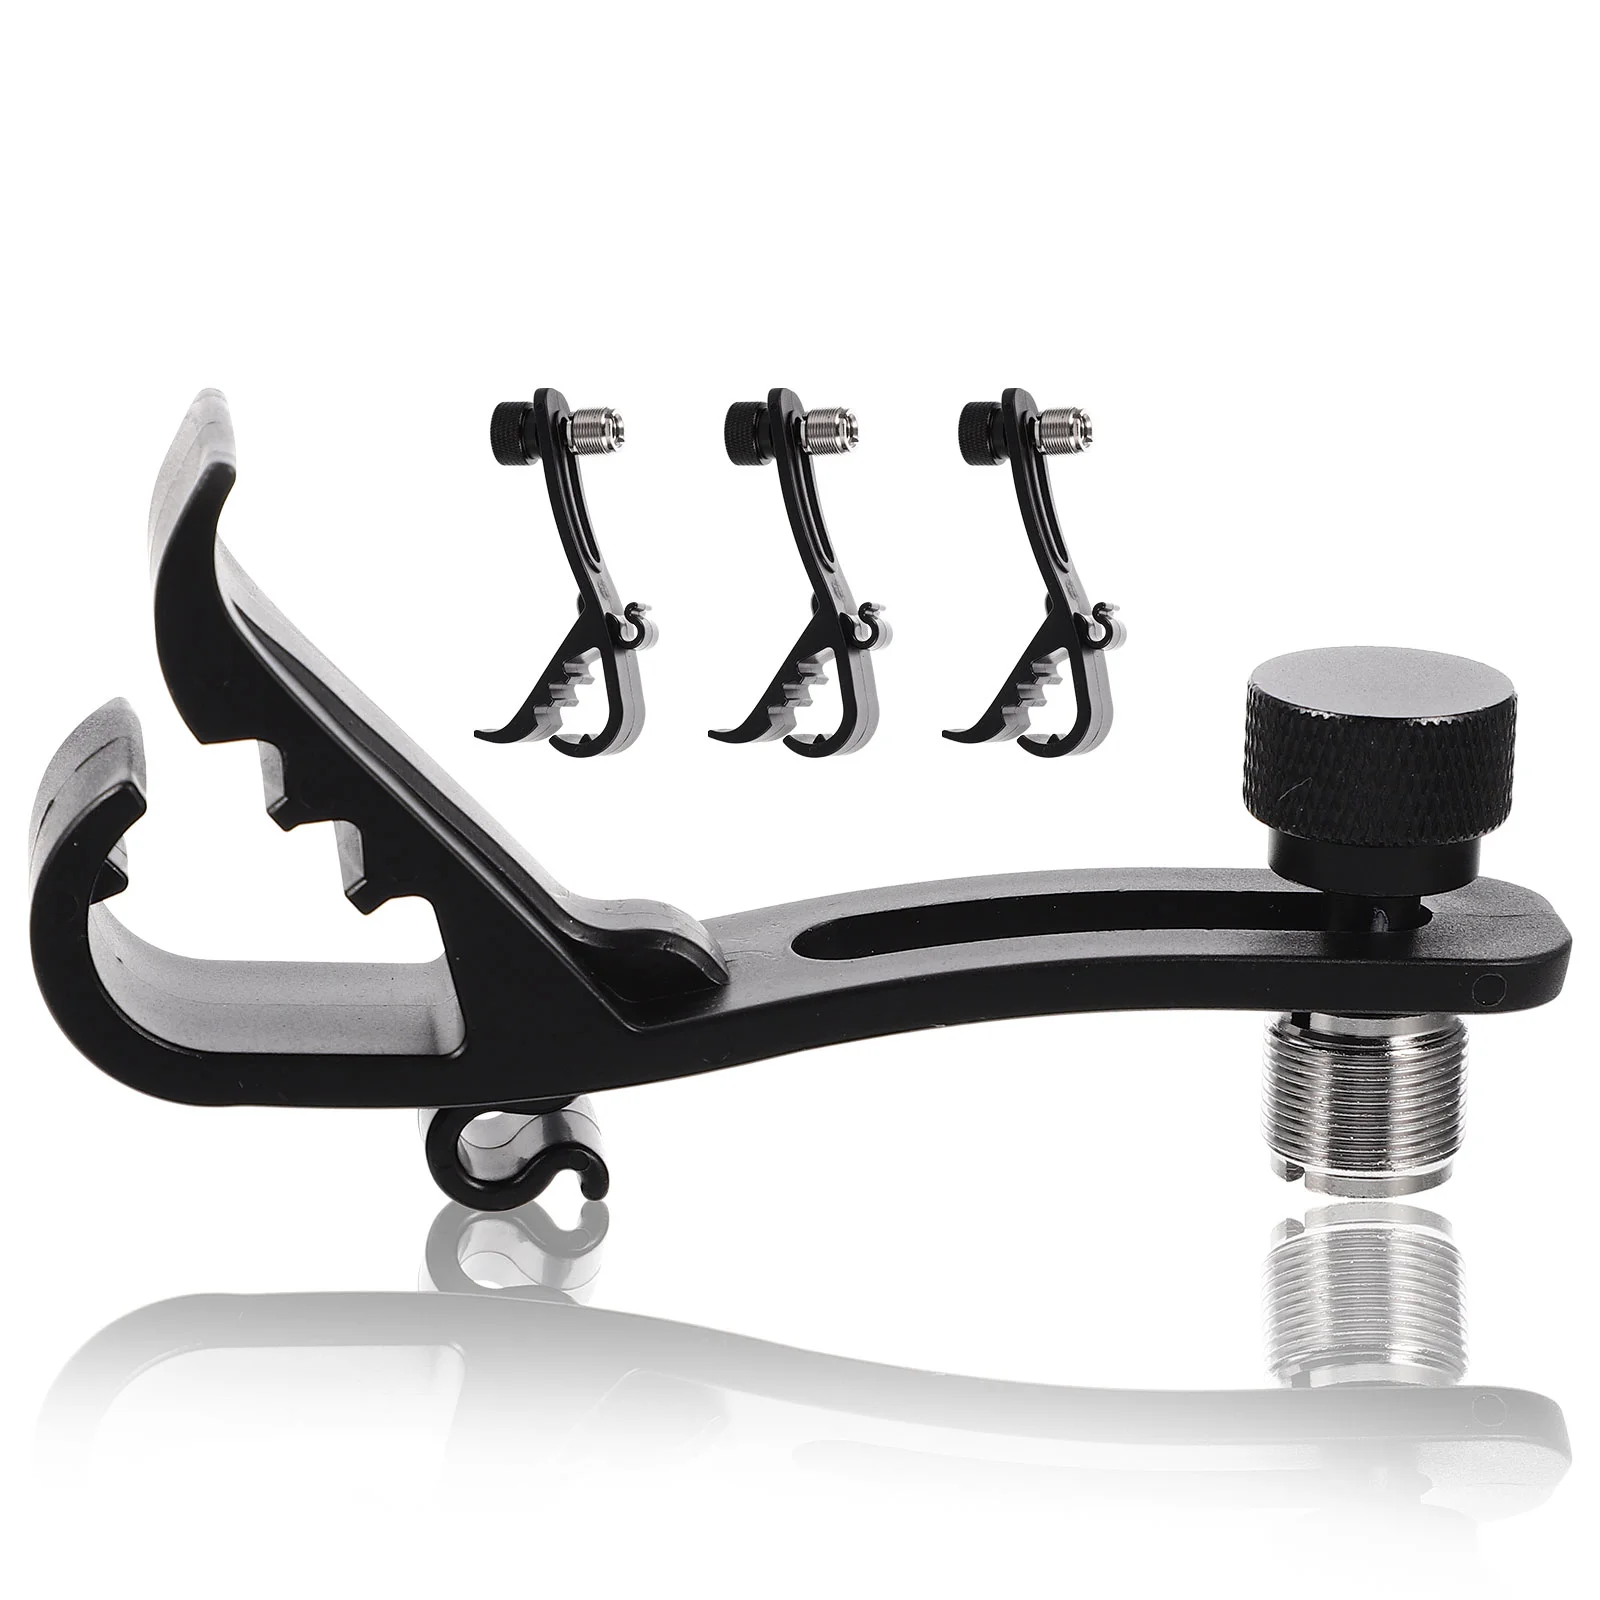 

4Pcs Drum Microphone Clamping Mount Drum Set Microphone Holder for Studio